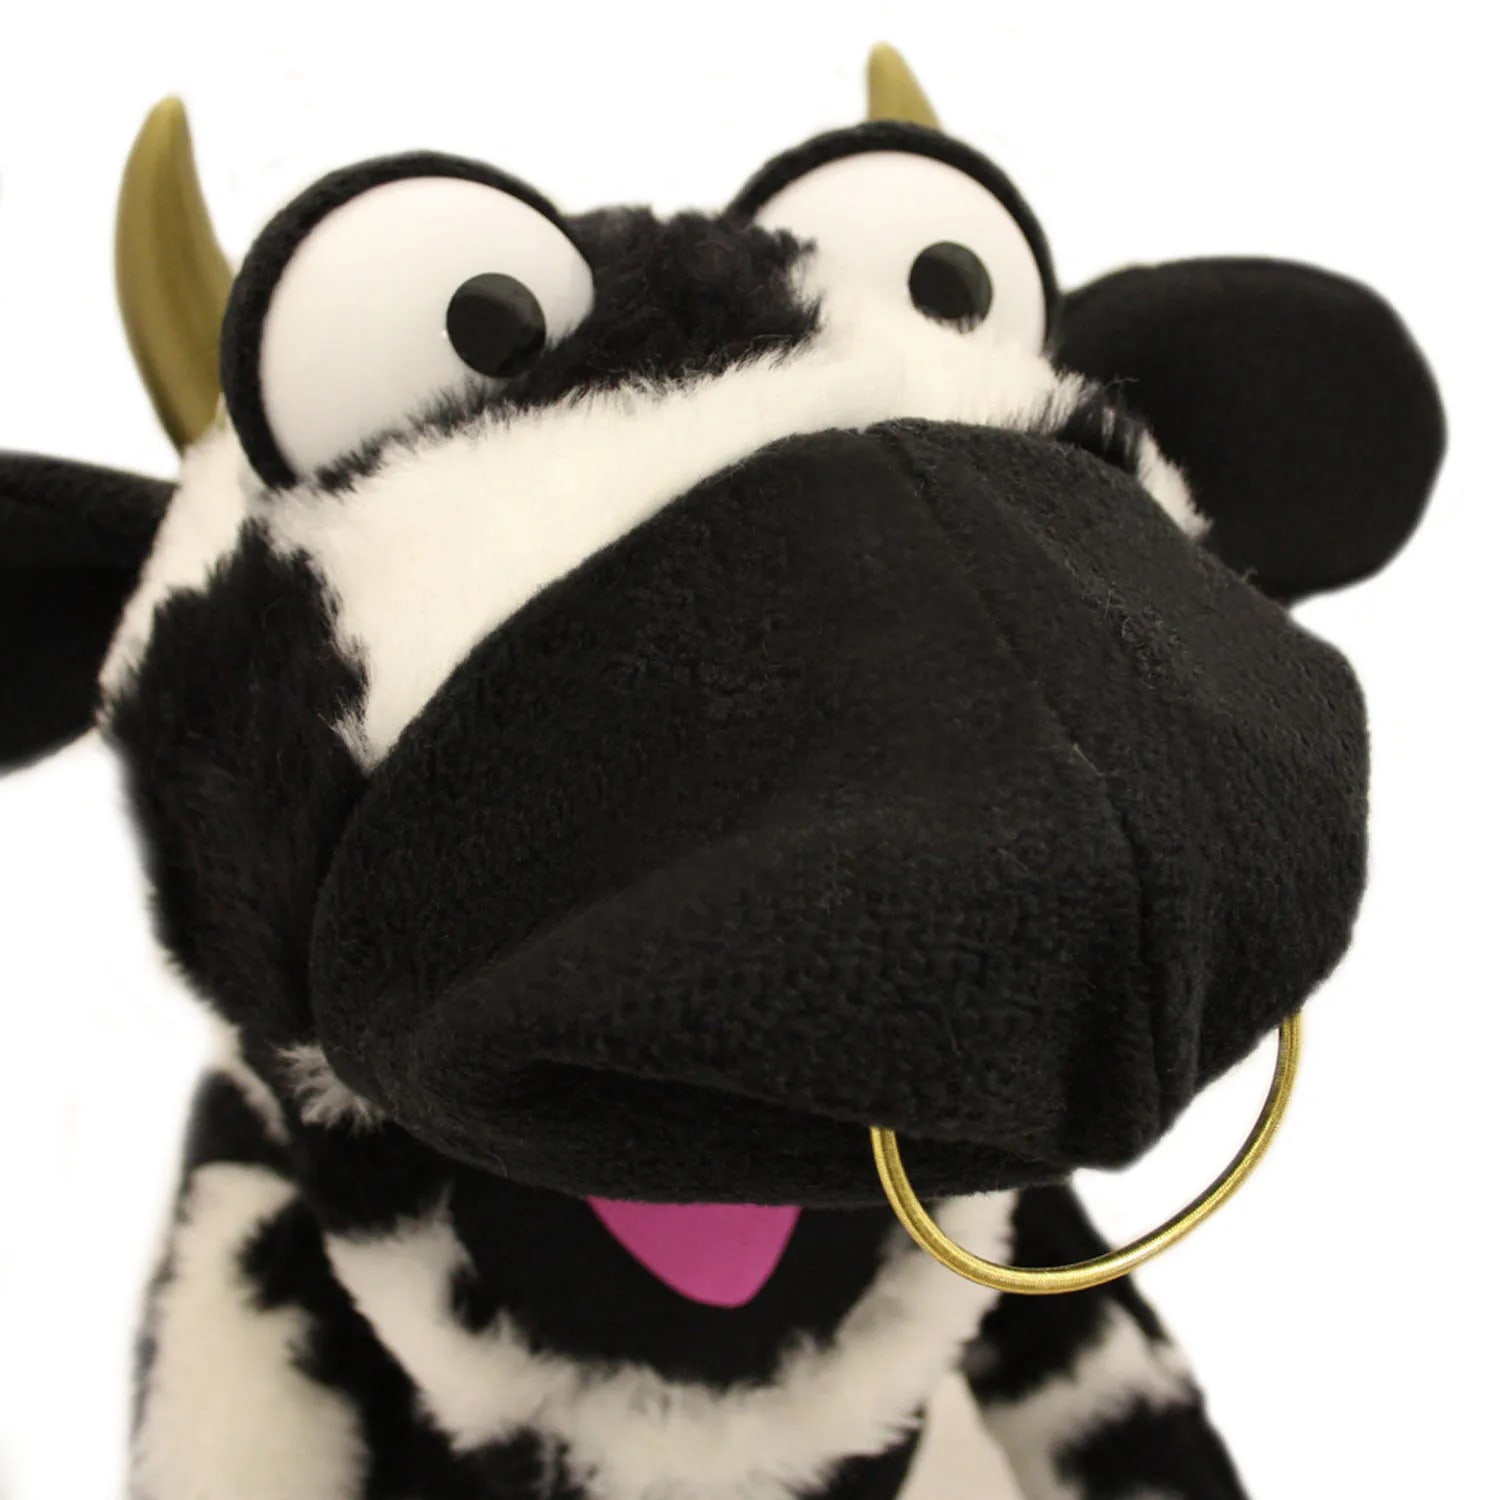 Angus Large Cow Puppet